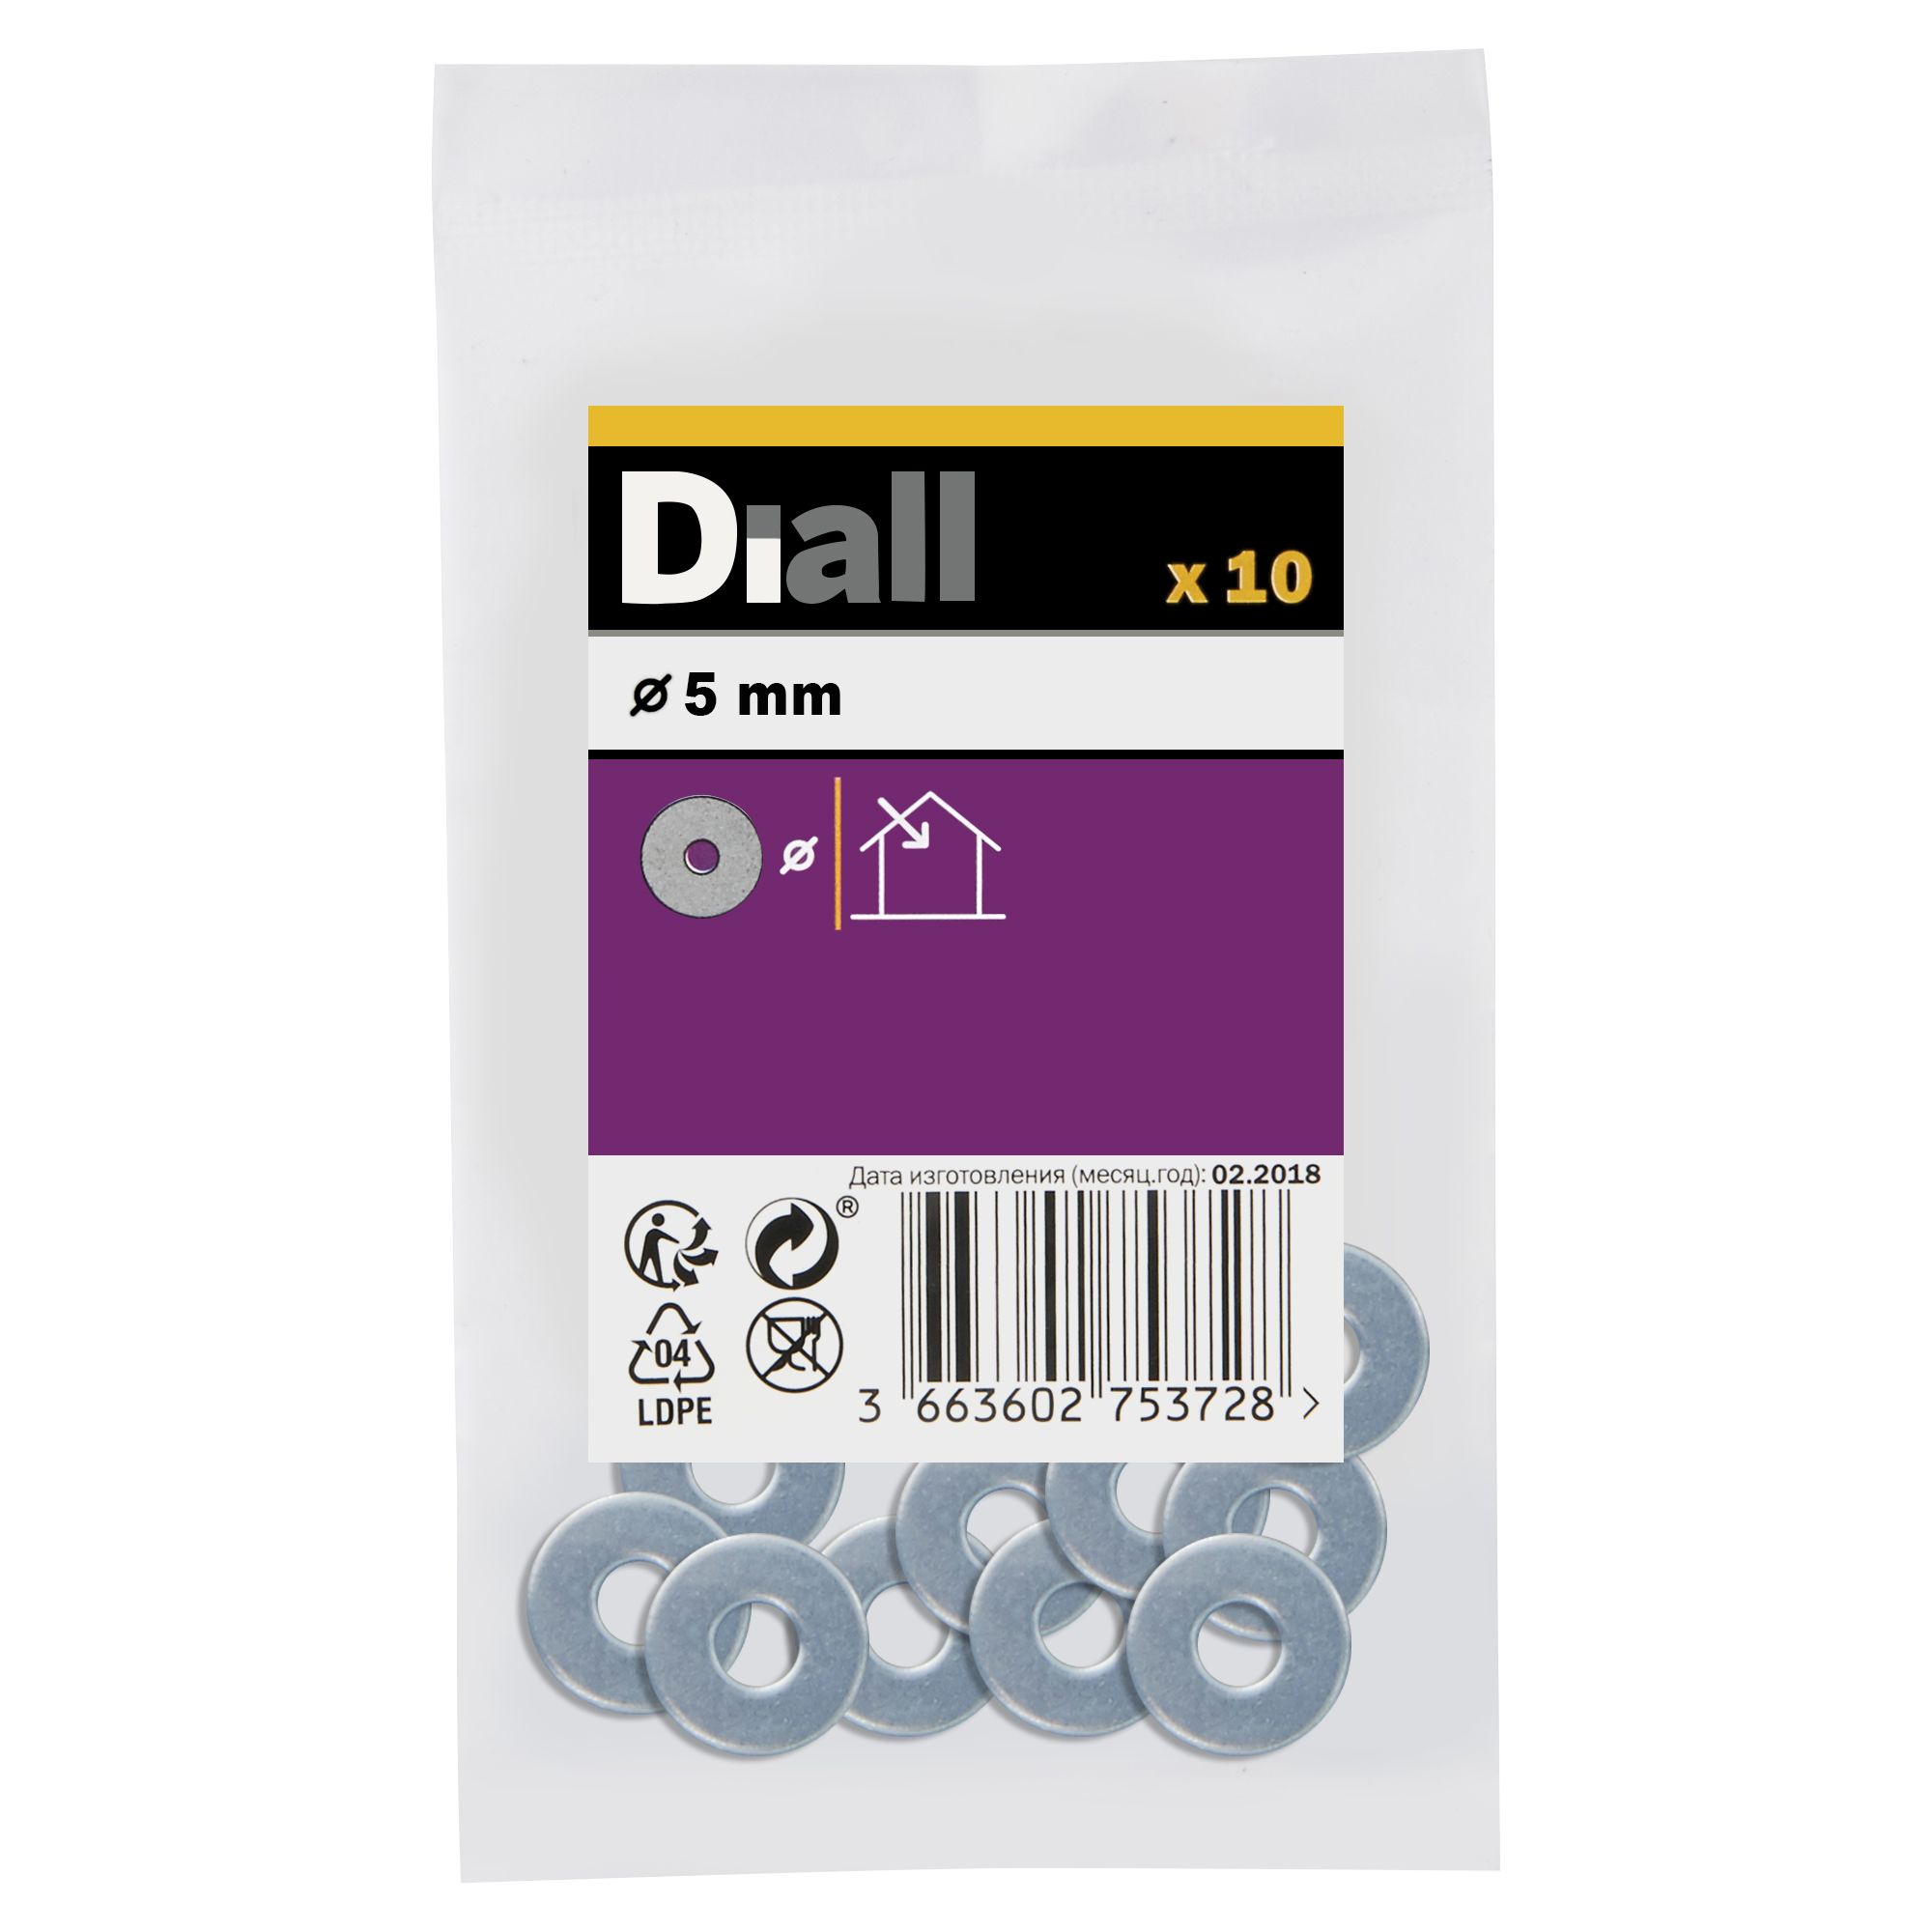 Diall M5 Carbon steel Flat Washer, (Dia)5mm, Pack of 10